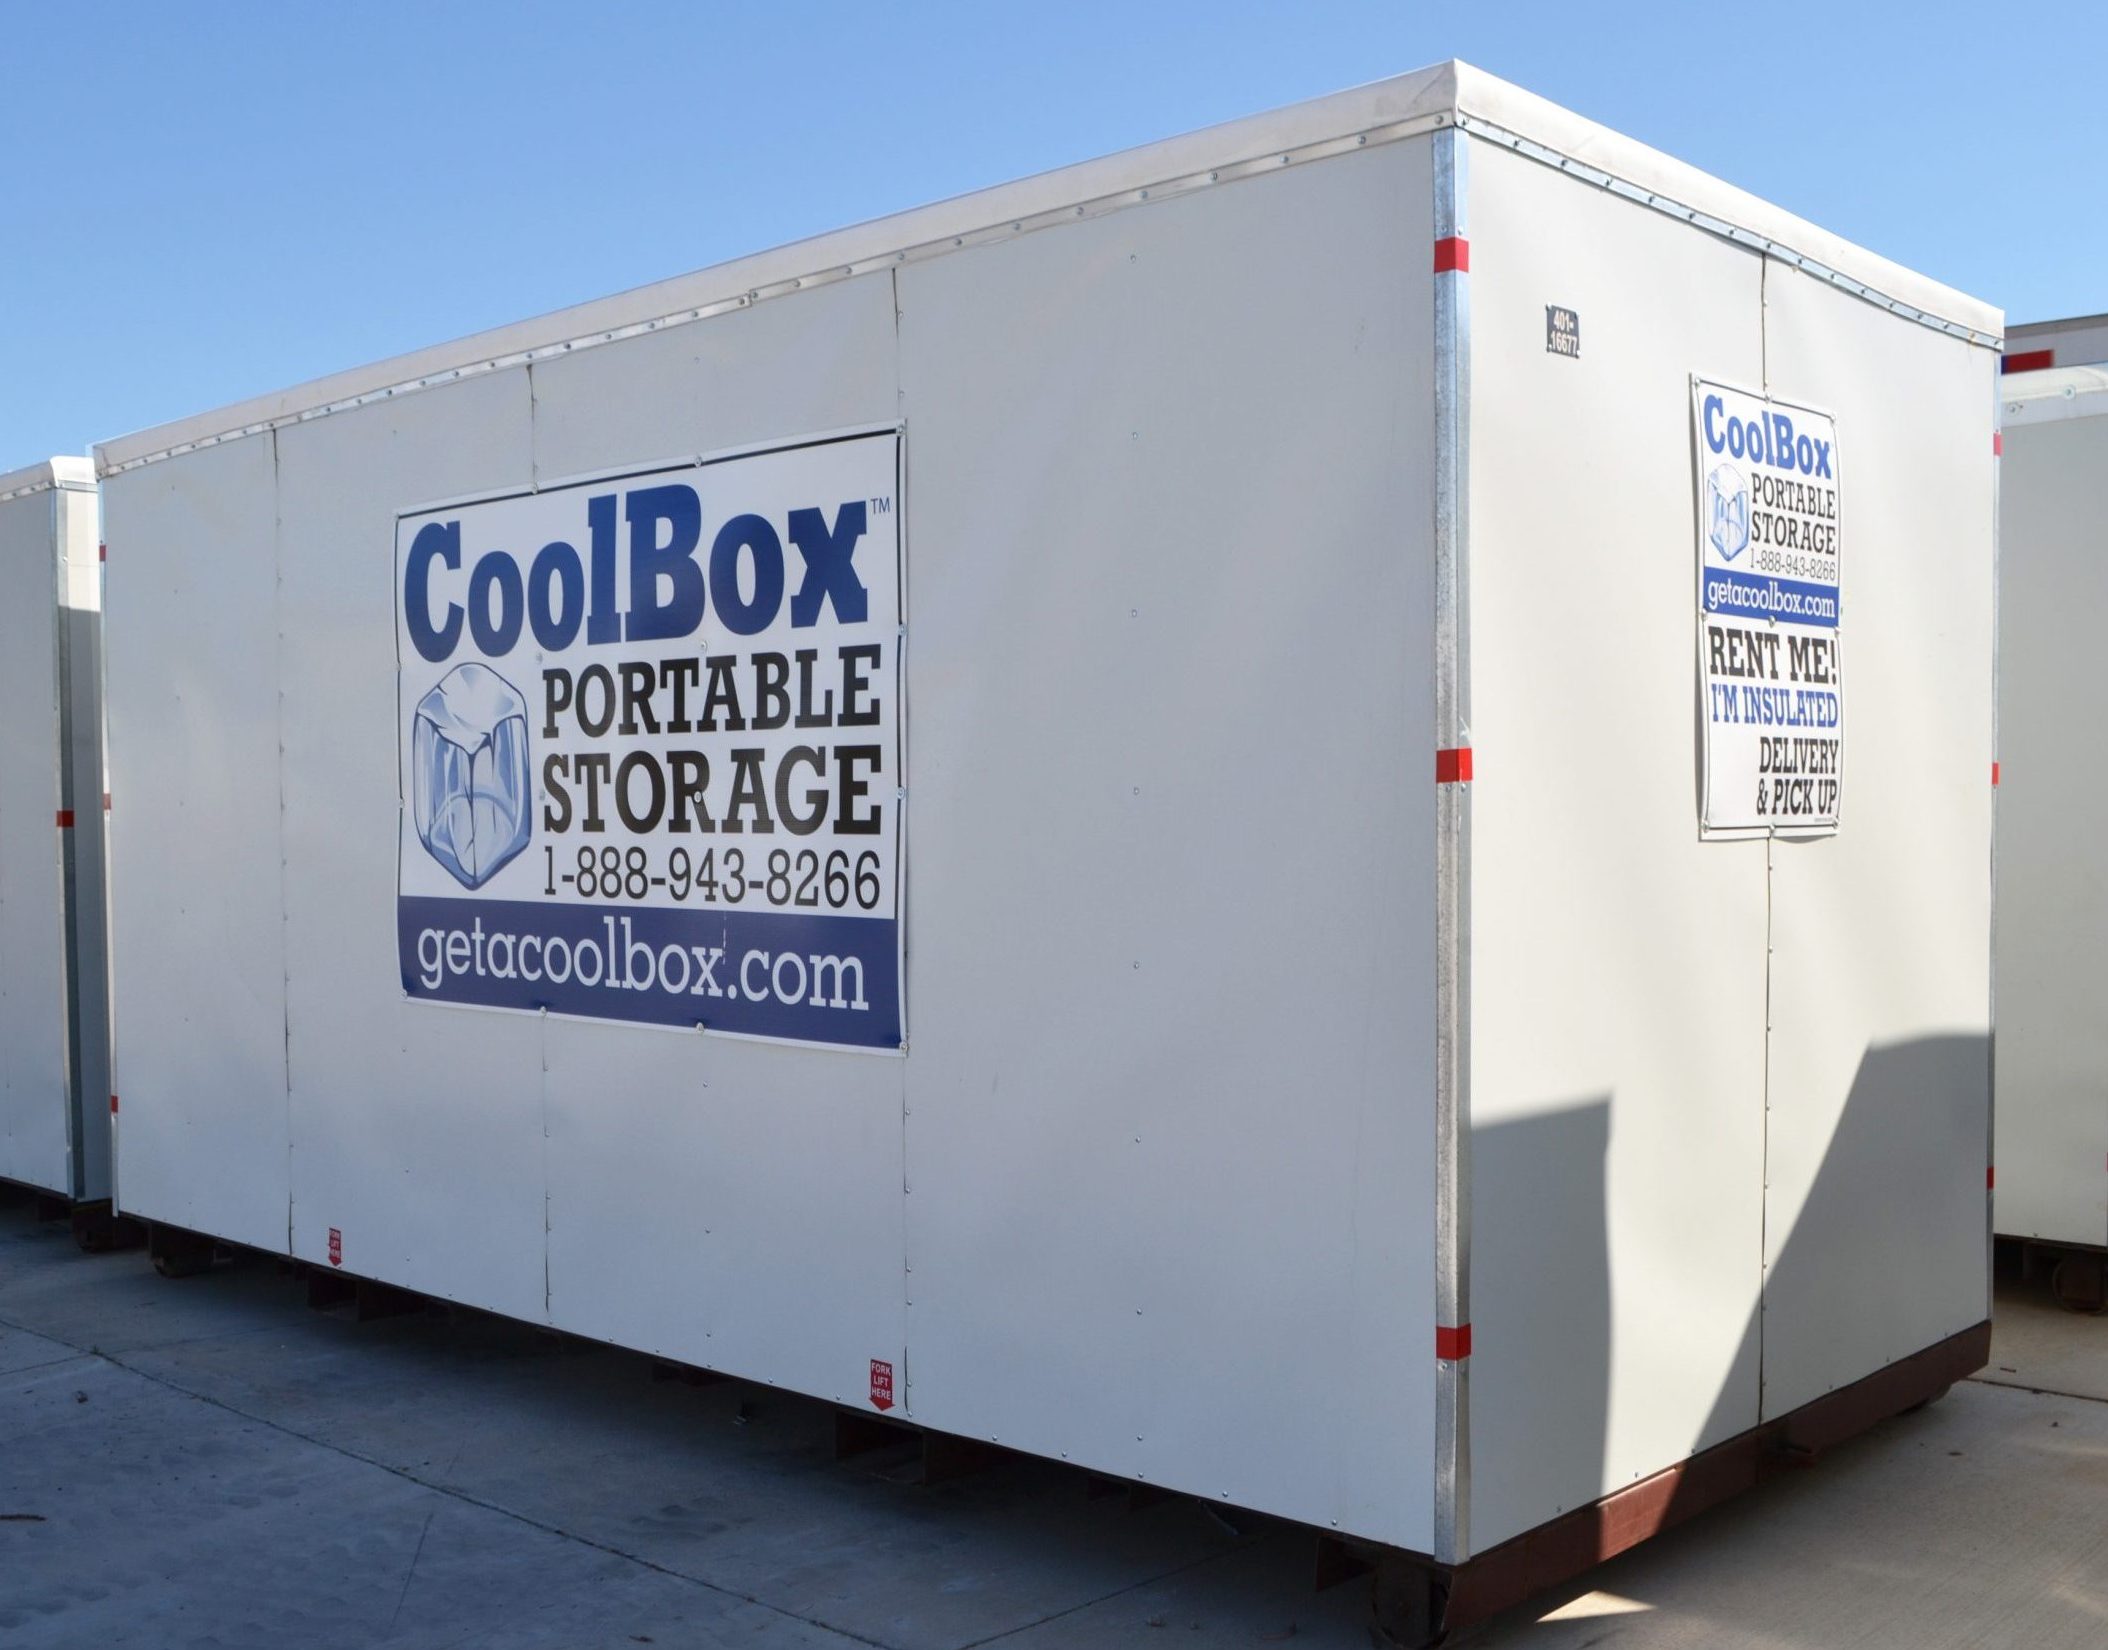 Cool Box Portable Storage 12 foot storage container units